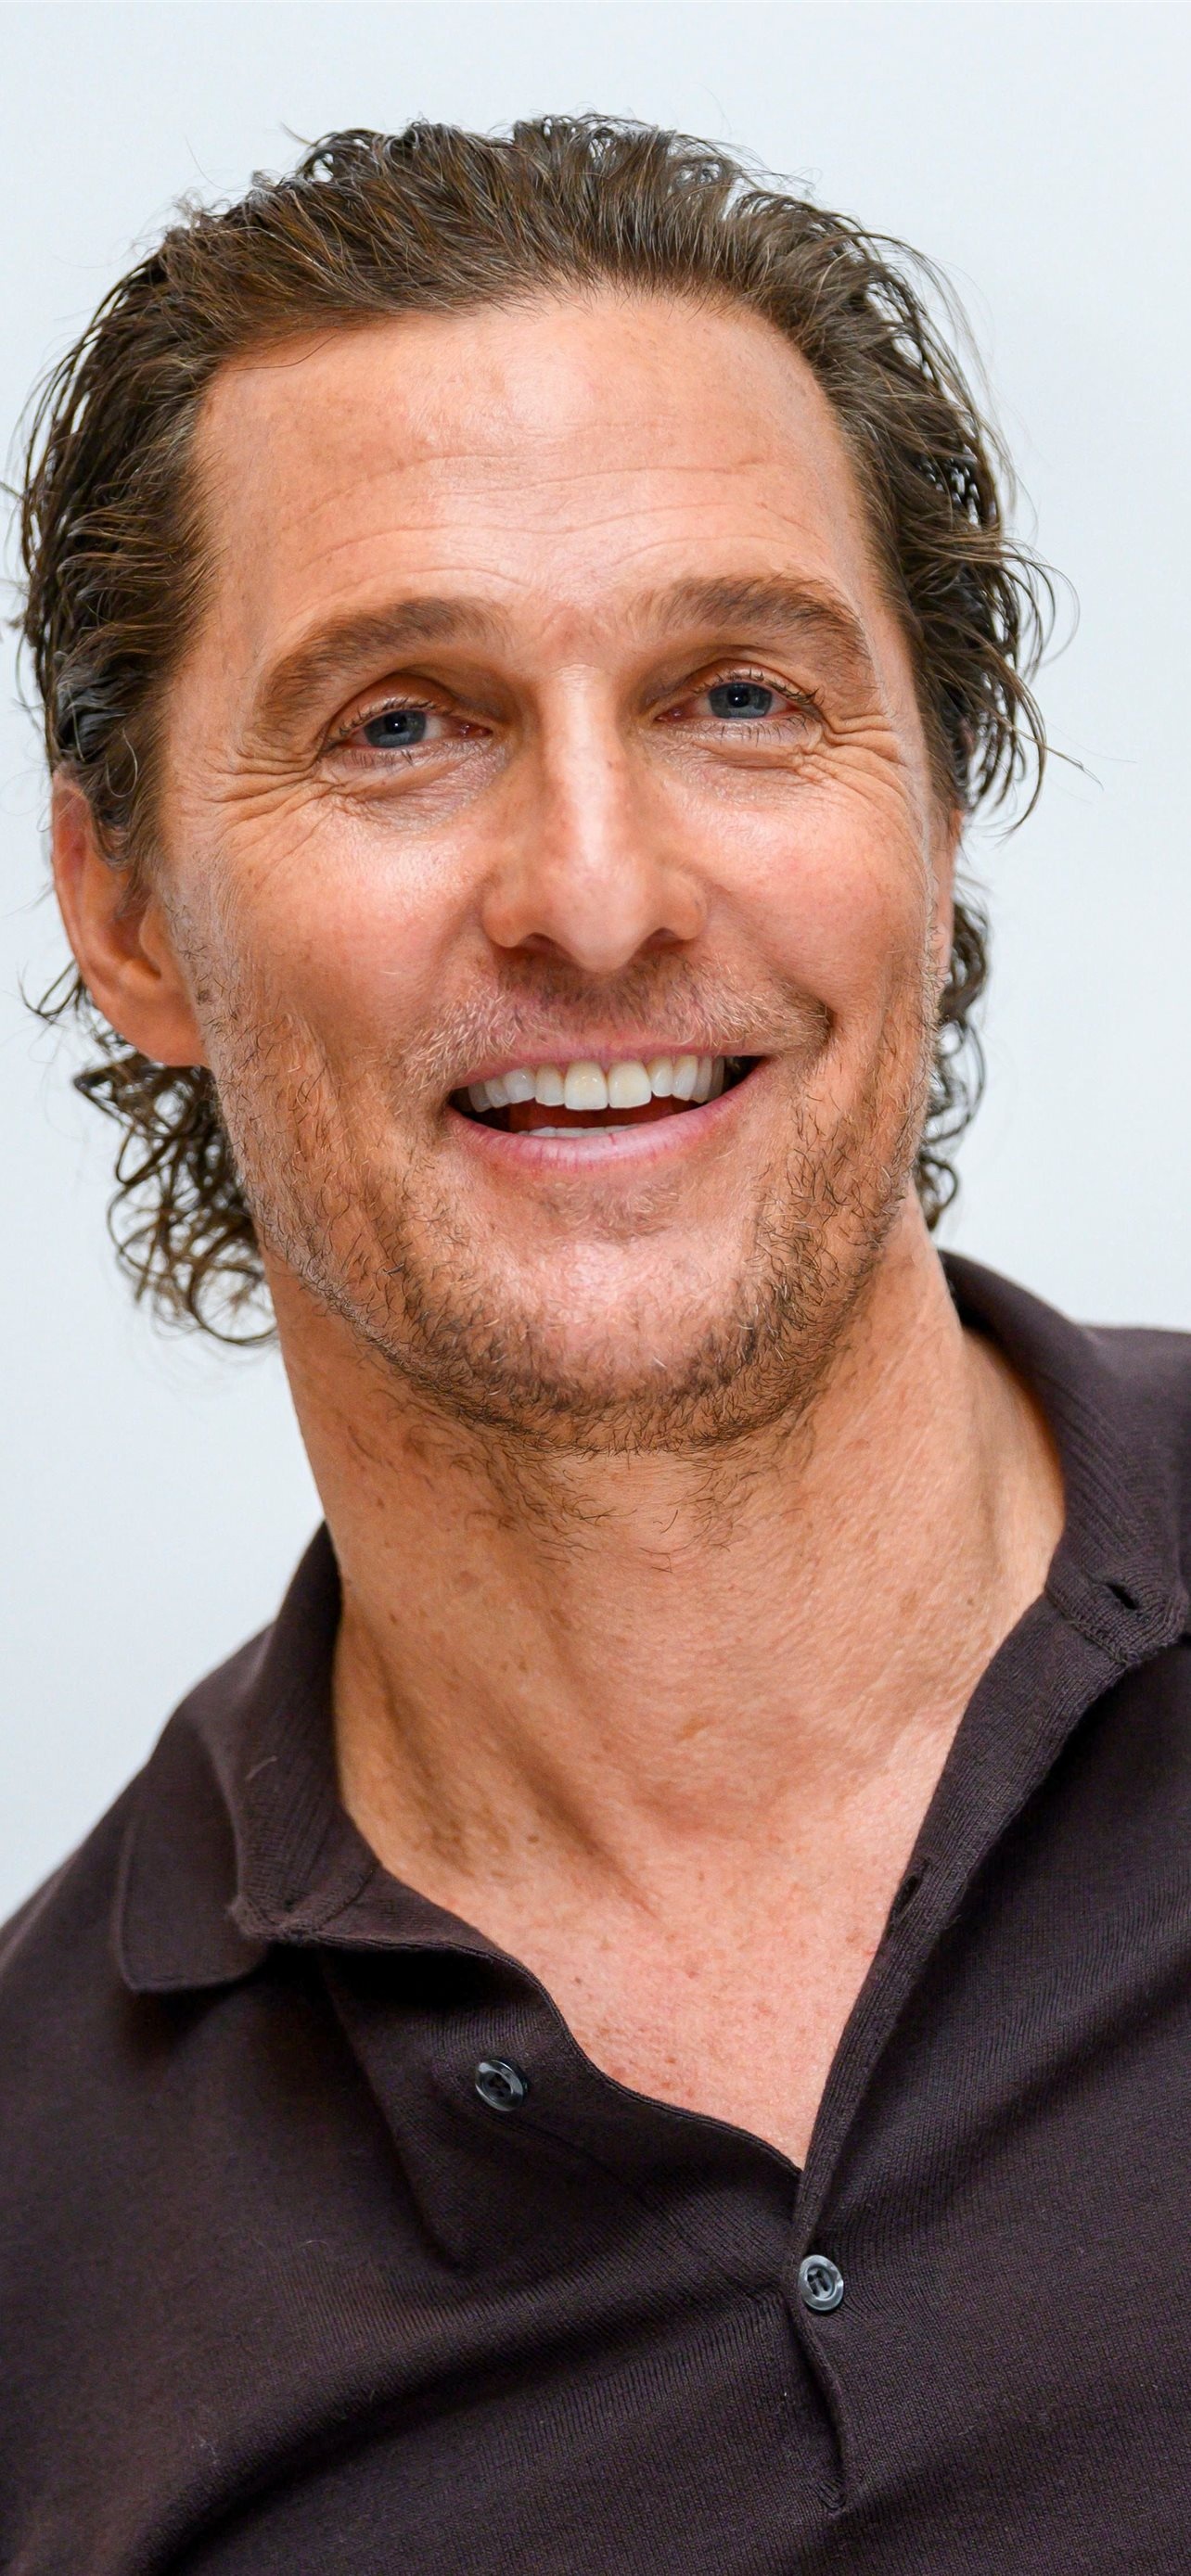 Matthew McConaughey: Featured as Tripp in a 2006 romantic comedy film, Failure to Launch. 1290x2780 HD Background.